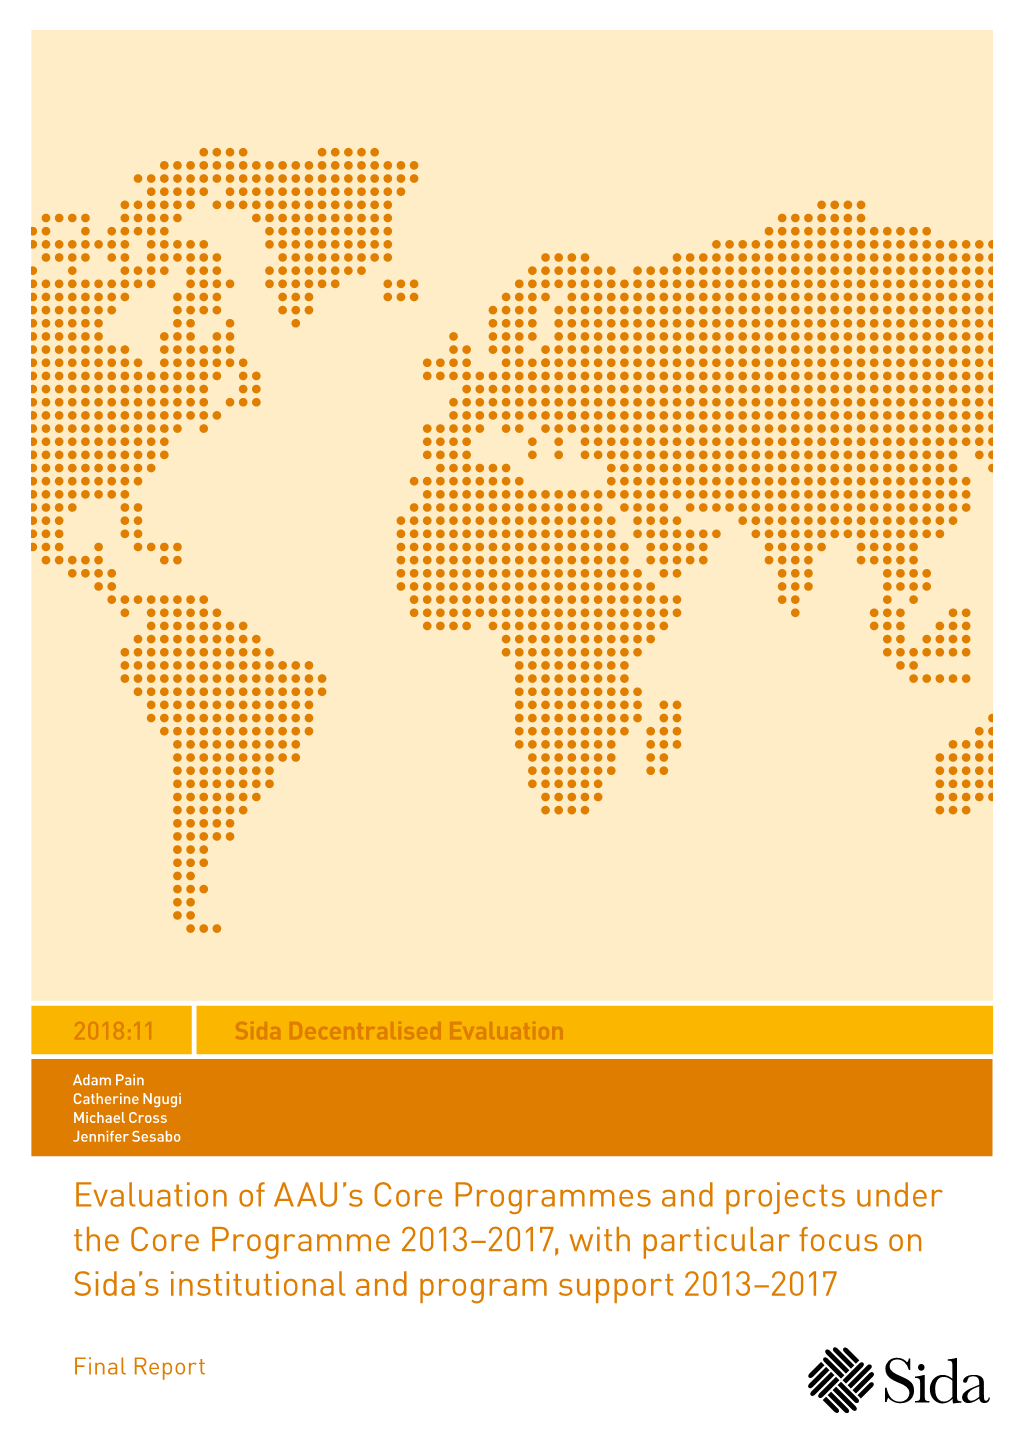 Evaluation of AAU's Core Programmes and Projects